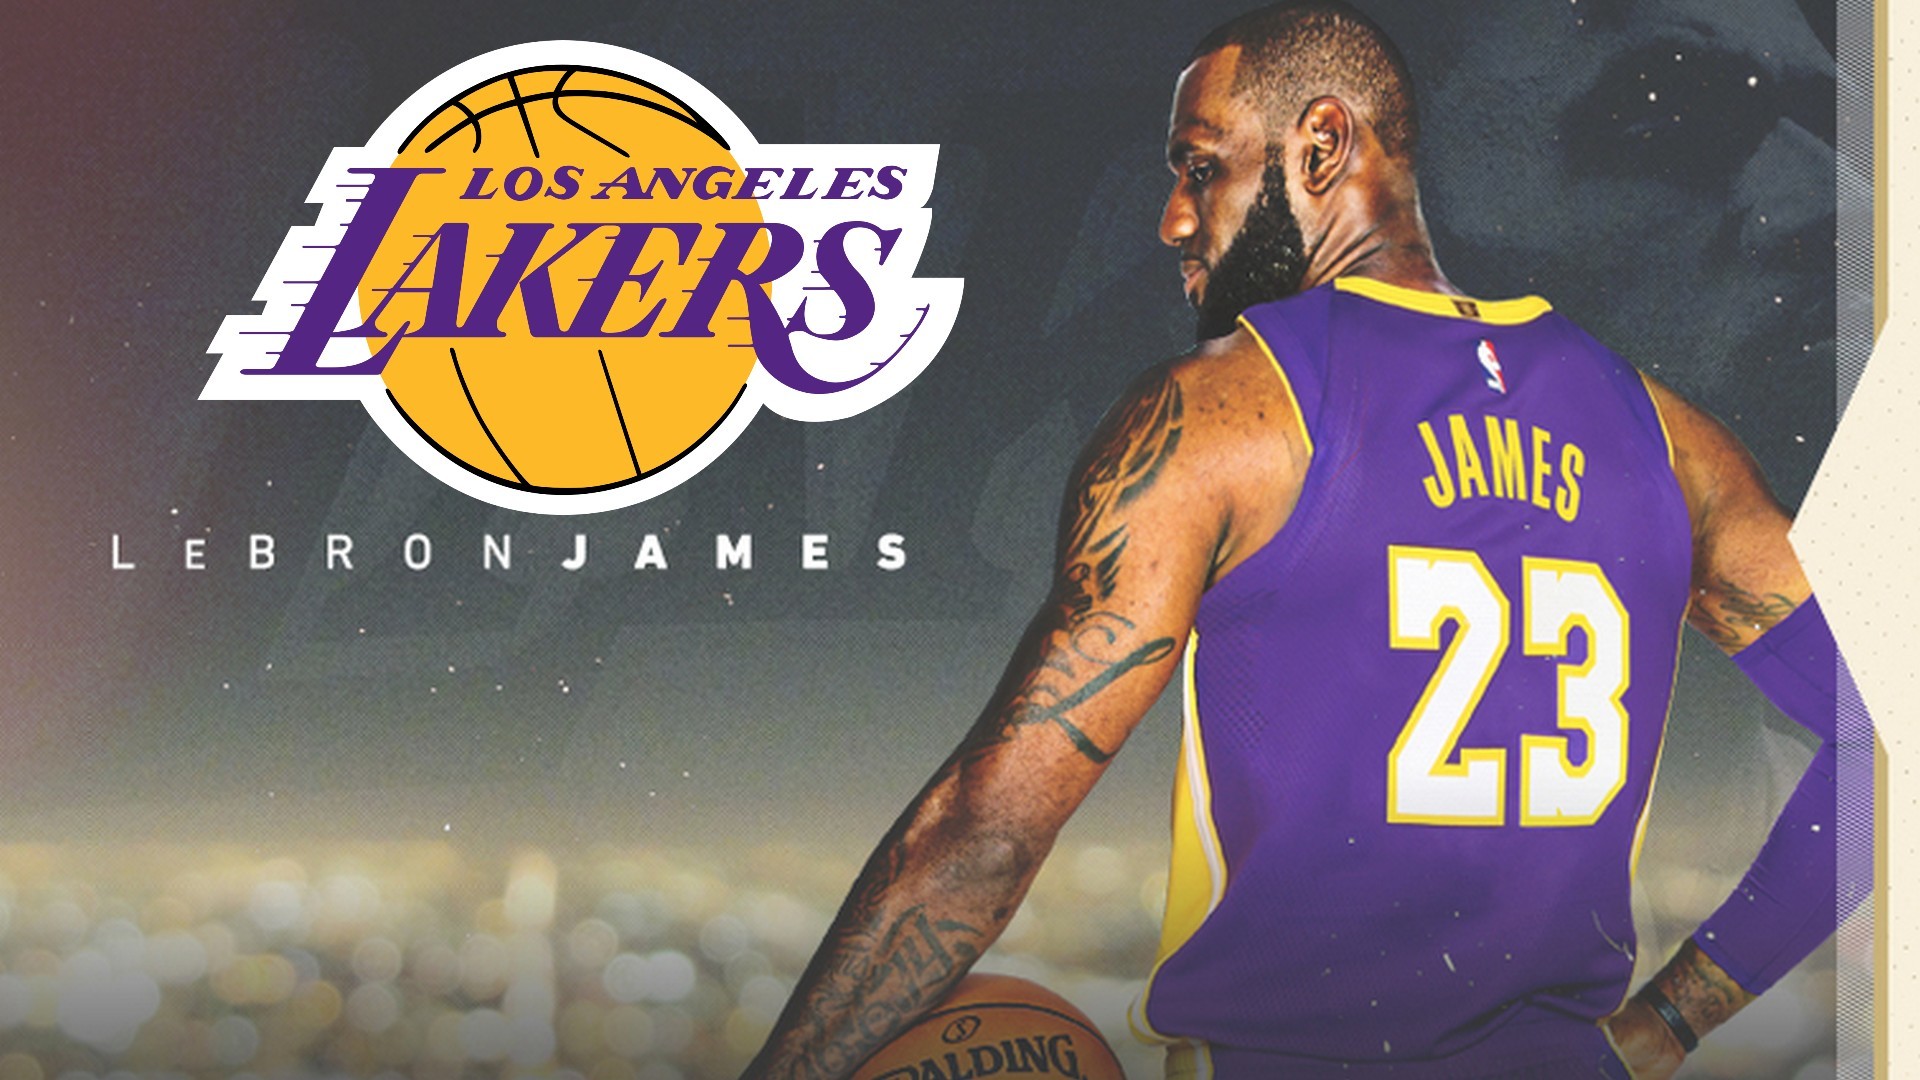 1920x1080 Wallpapers HD LeBron James Lakers with image dimensions  pixel.  You can make this wallpaper